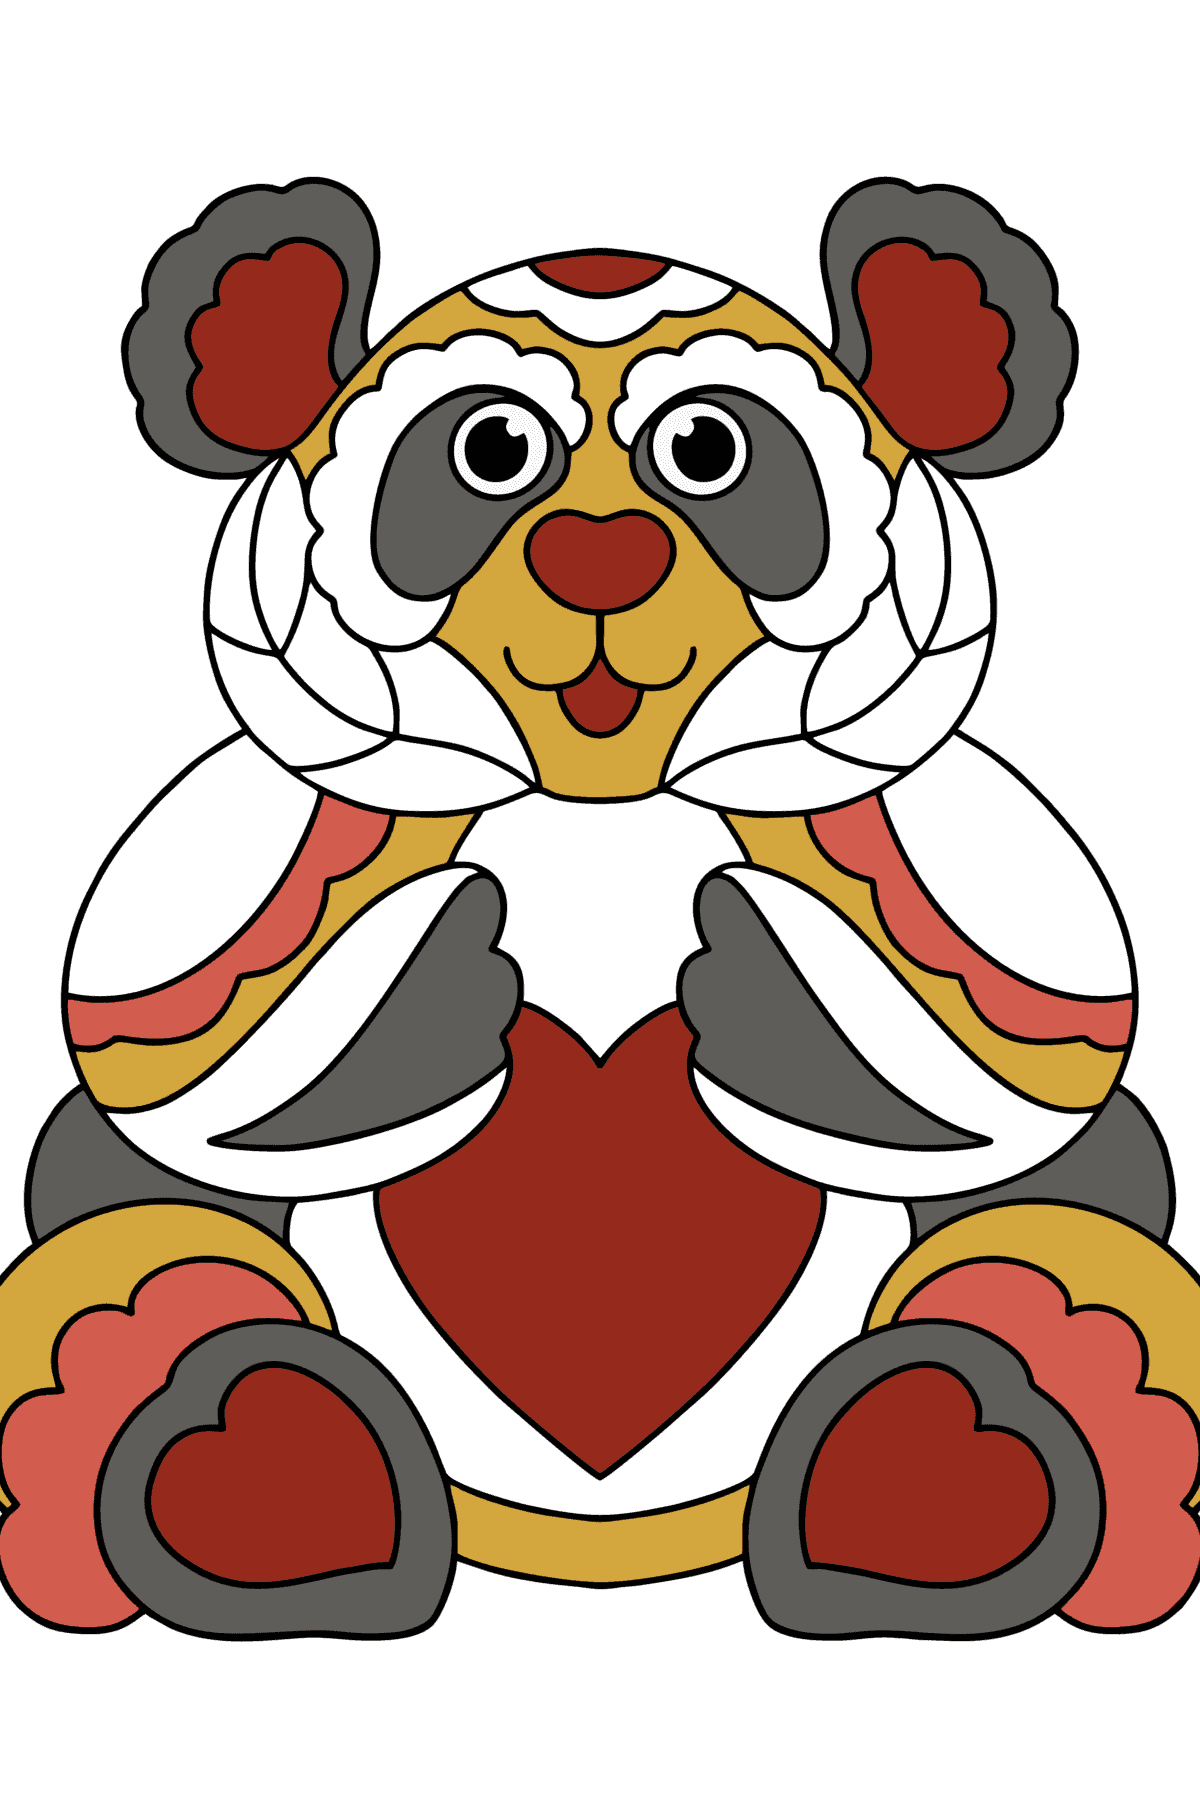 Panda antistress coloring page - Coloring Pages for Kids